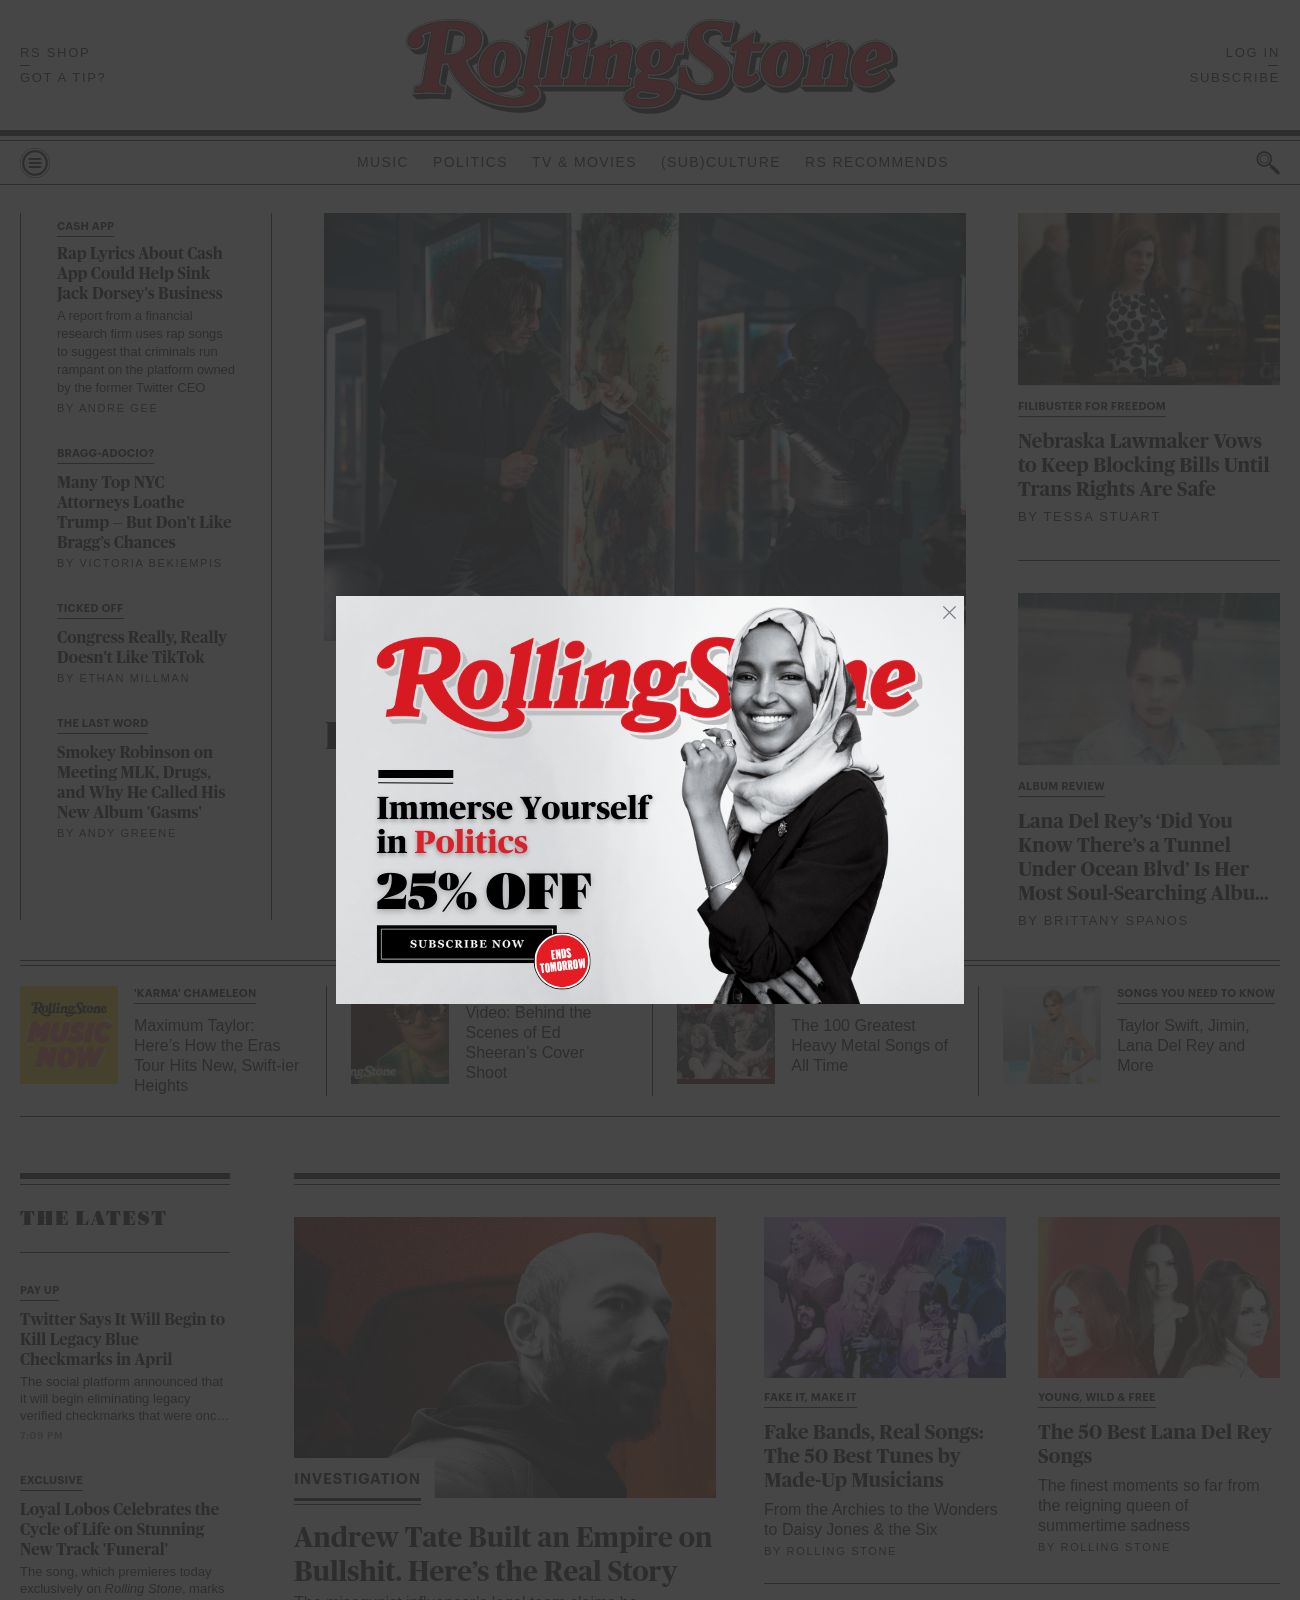 Rolling Stone at 2023-03-23 19:57:48-04:00 local time